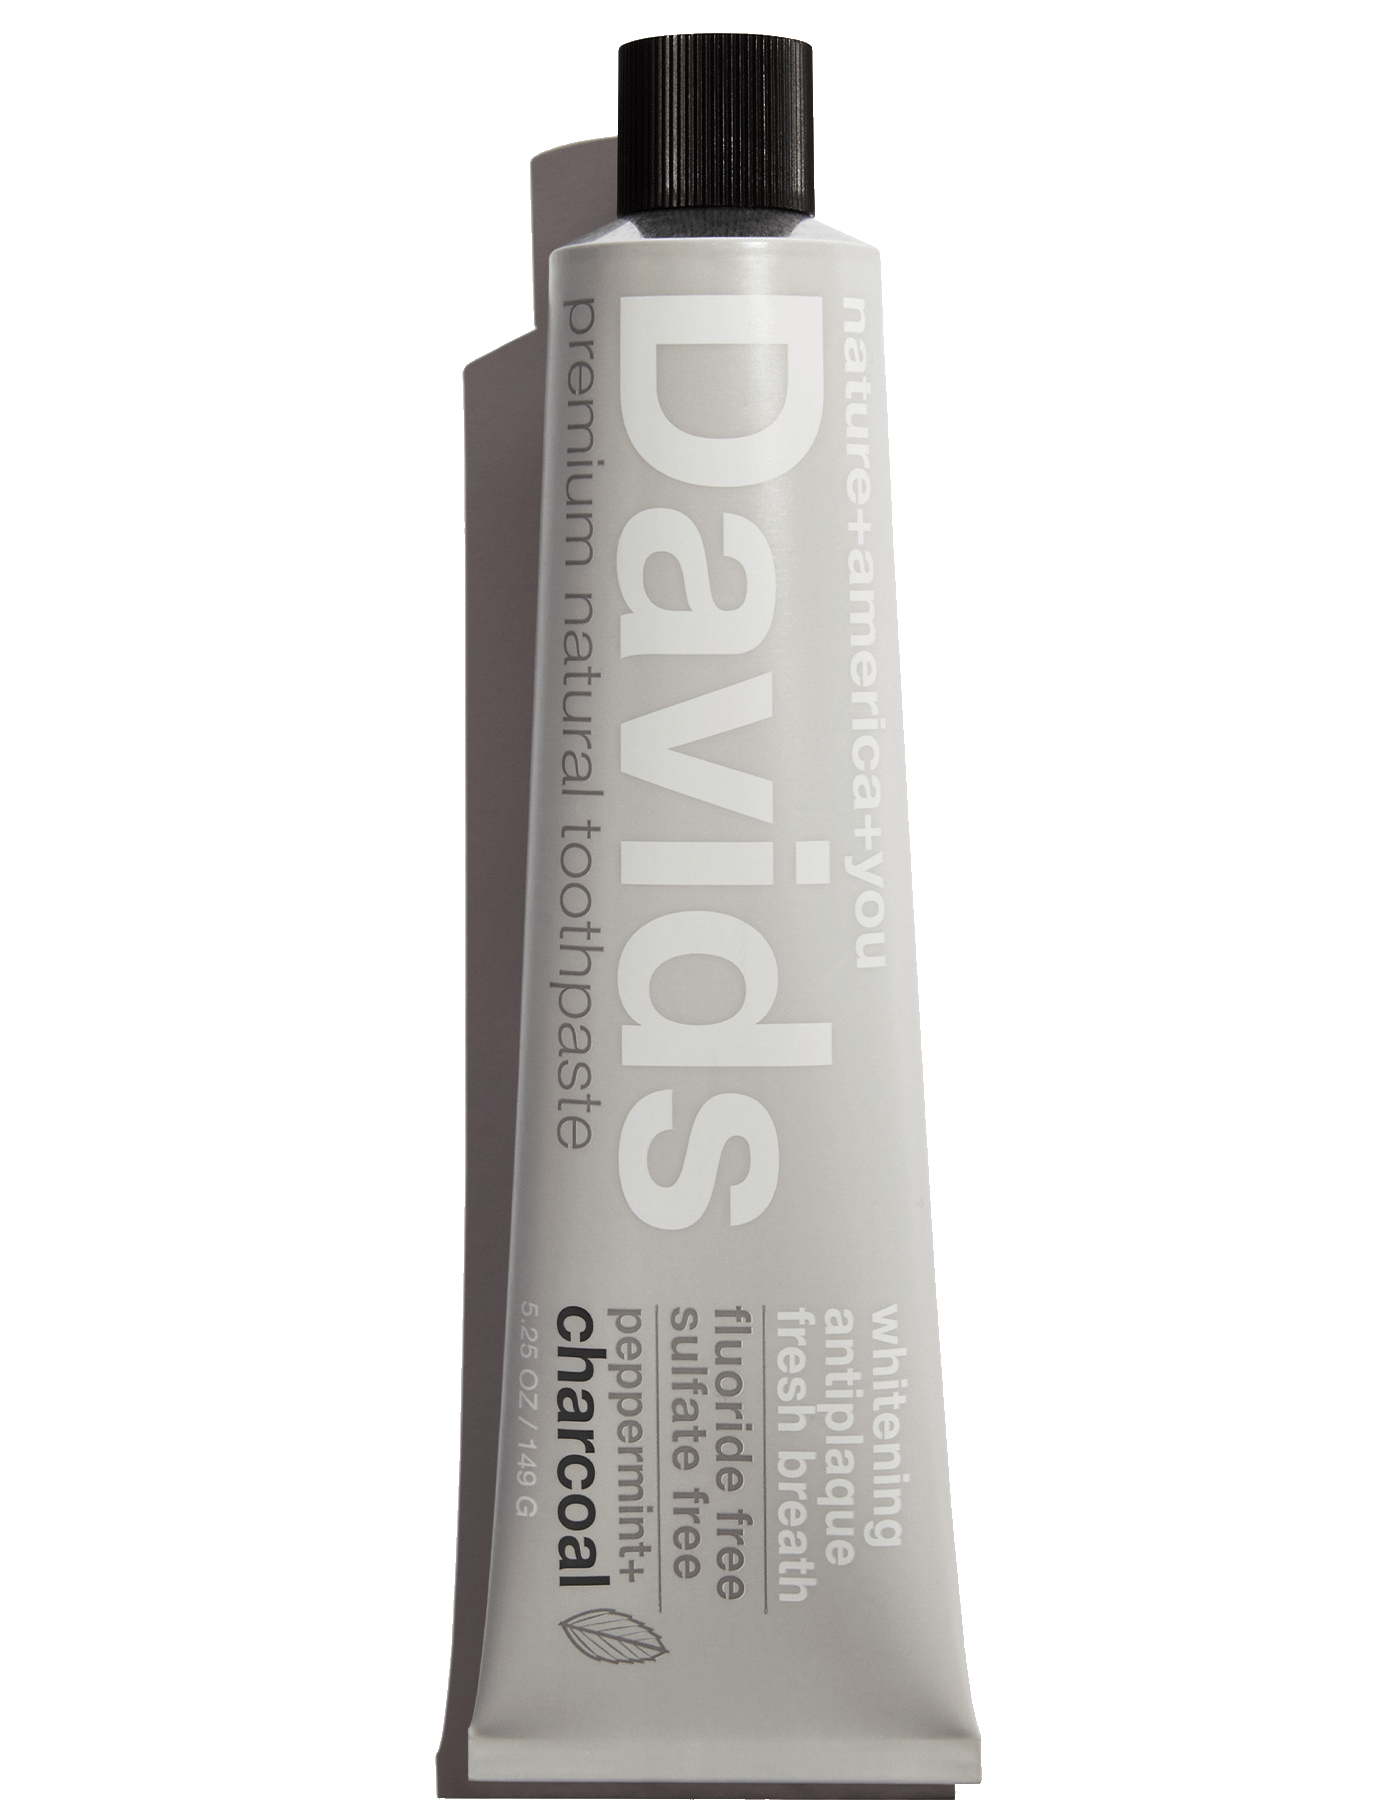 Davids premium toothpaste  /  charcoal+peppermint